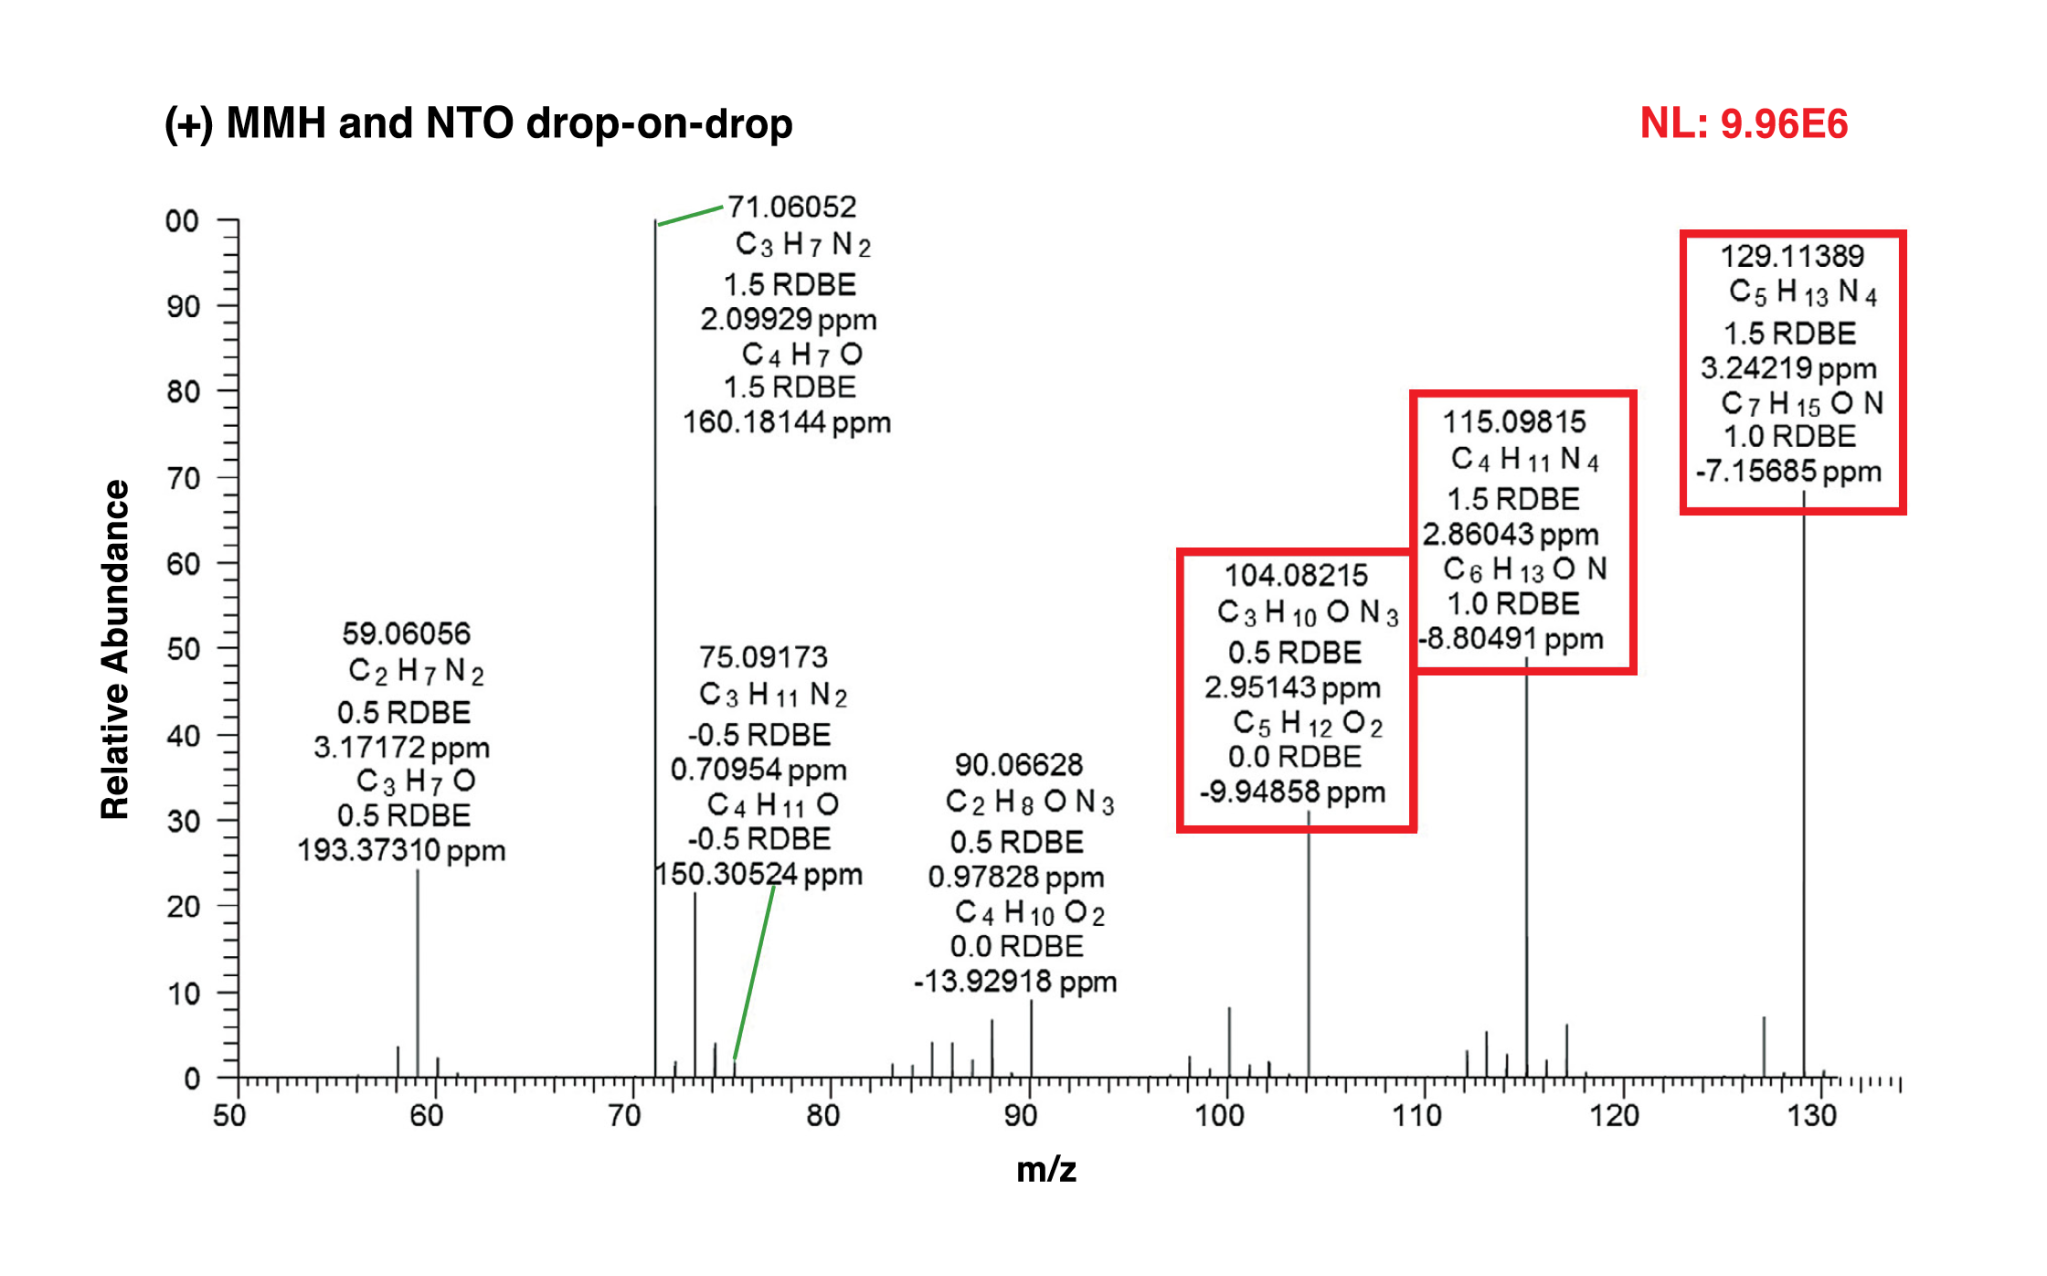 Example high-resolution mass spectrum collected during MMH/NTO drop-on-drop test. Ions boxed in red were subjected to Collision-Activated Dissociation in tandem mass spectrometry experiments to obtain structural information.